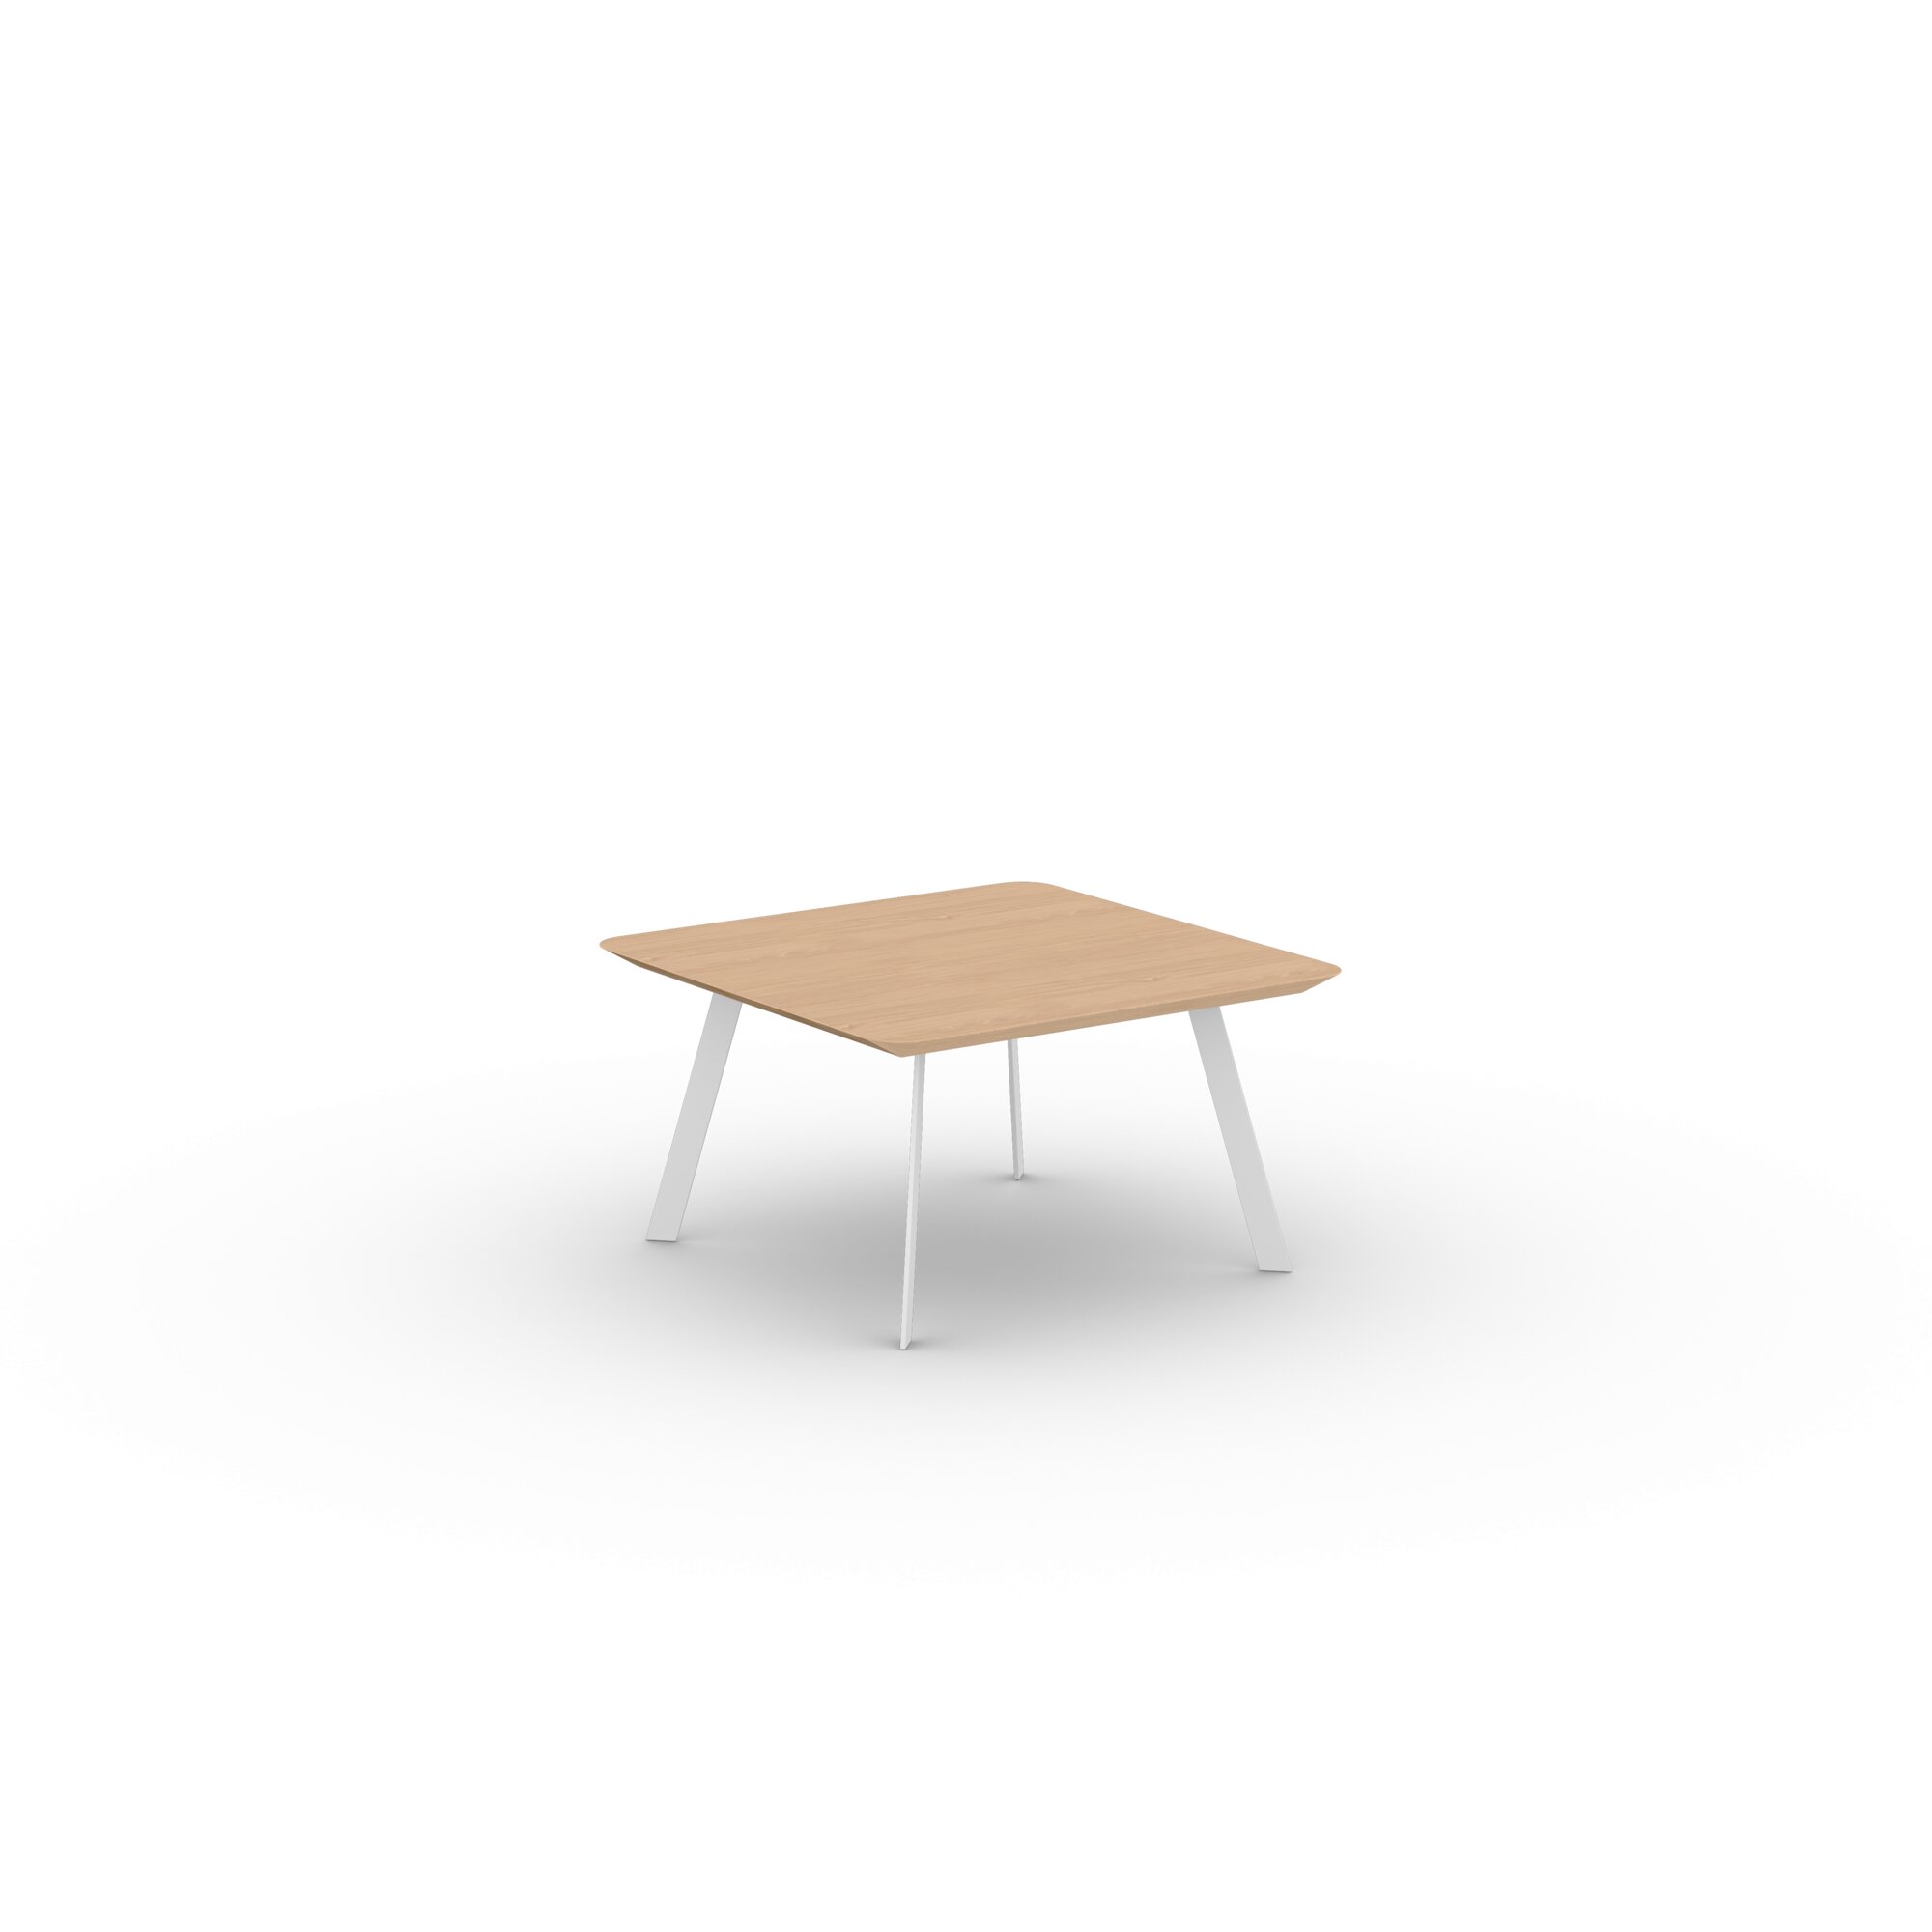 Design Coffee Table | New Co Coffee Table 70 Square White | Oak hardwax oil natural light 3041 | Studio HENK| 